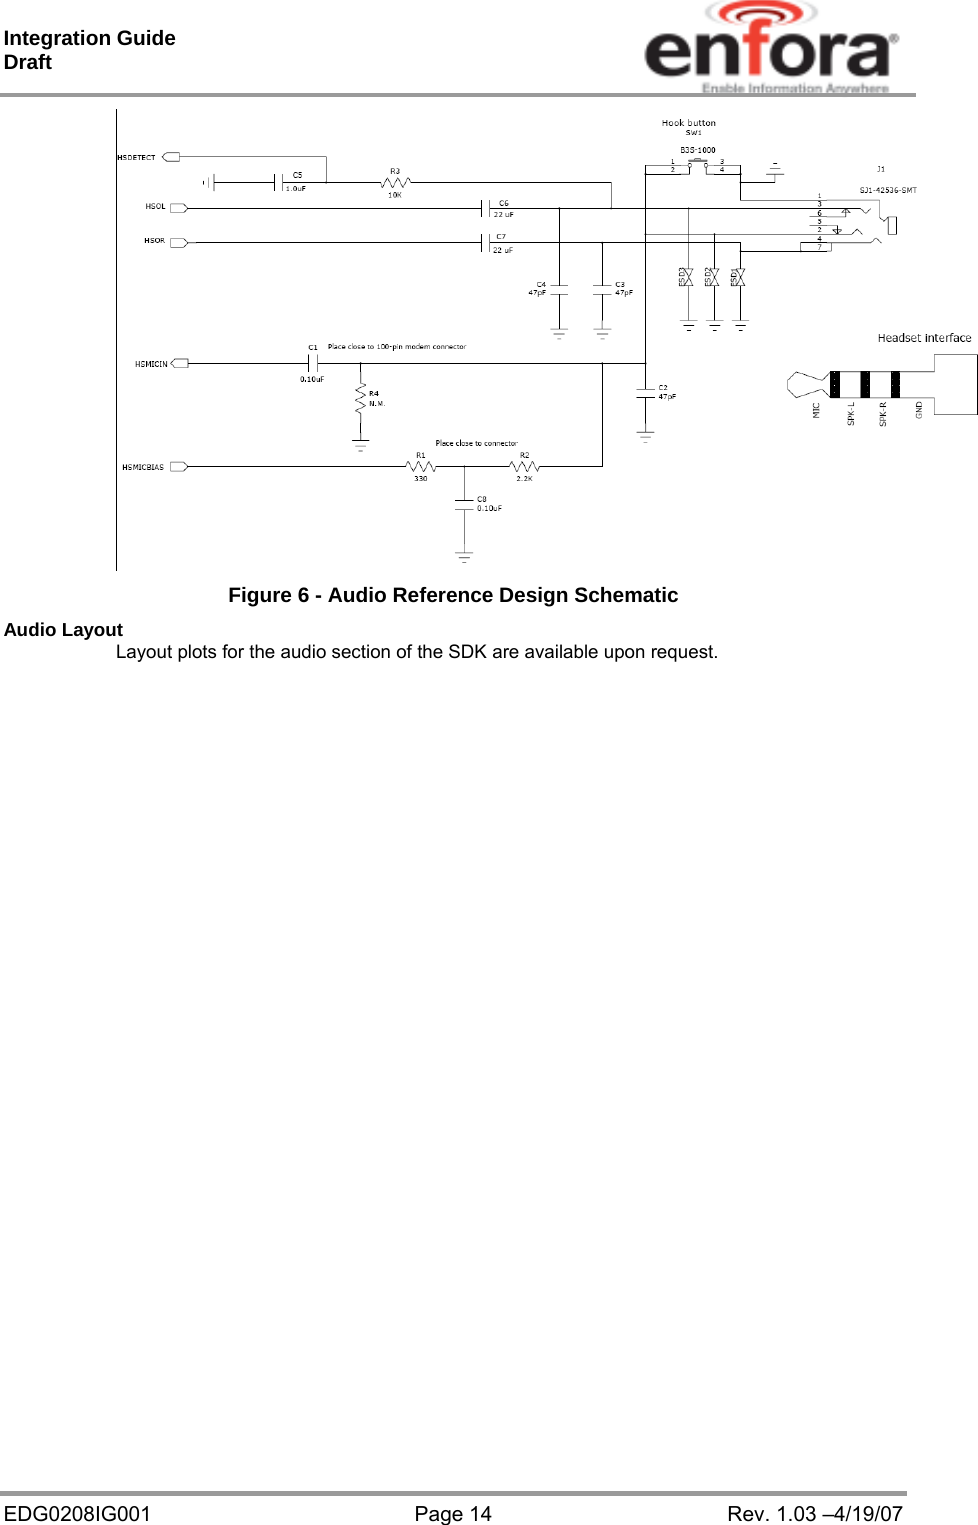 Integration Guide  Draft EDG0208IG001  Page 14  Rev. 1.03 –4/19/07  Figure 6 - Audio Reference Design Schematic Audio Layout Layout plots for the audio section of the SDK are available upon request.    